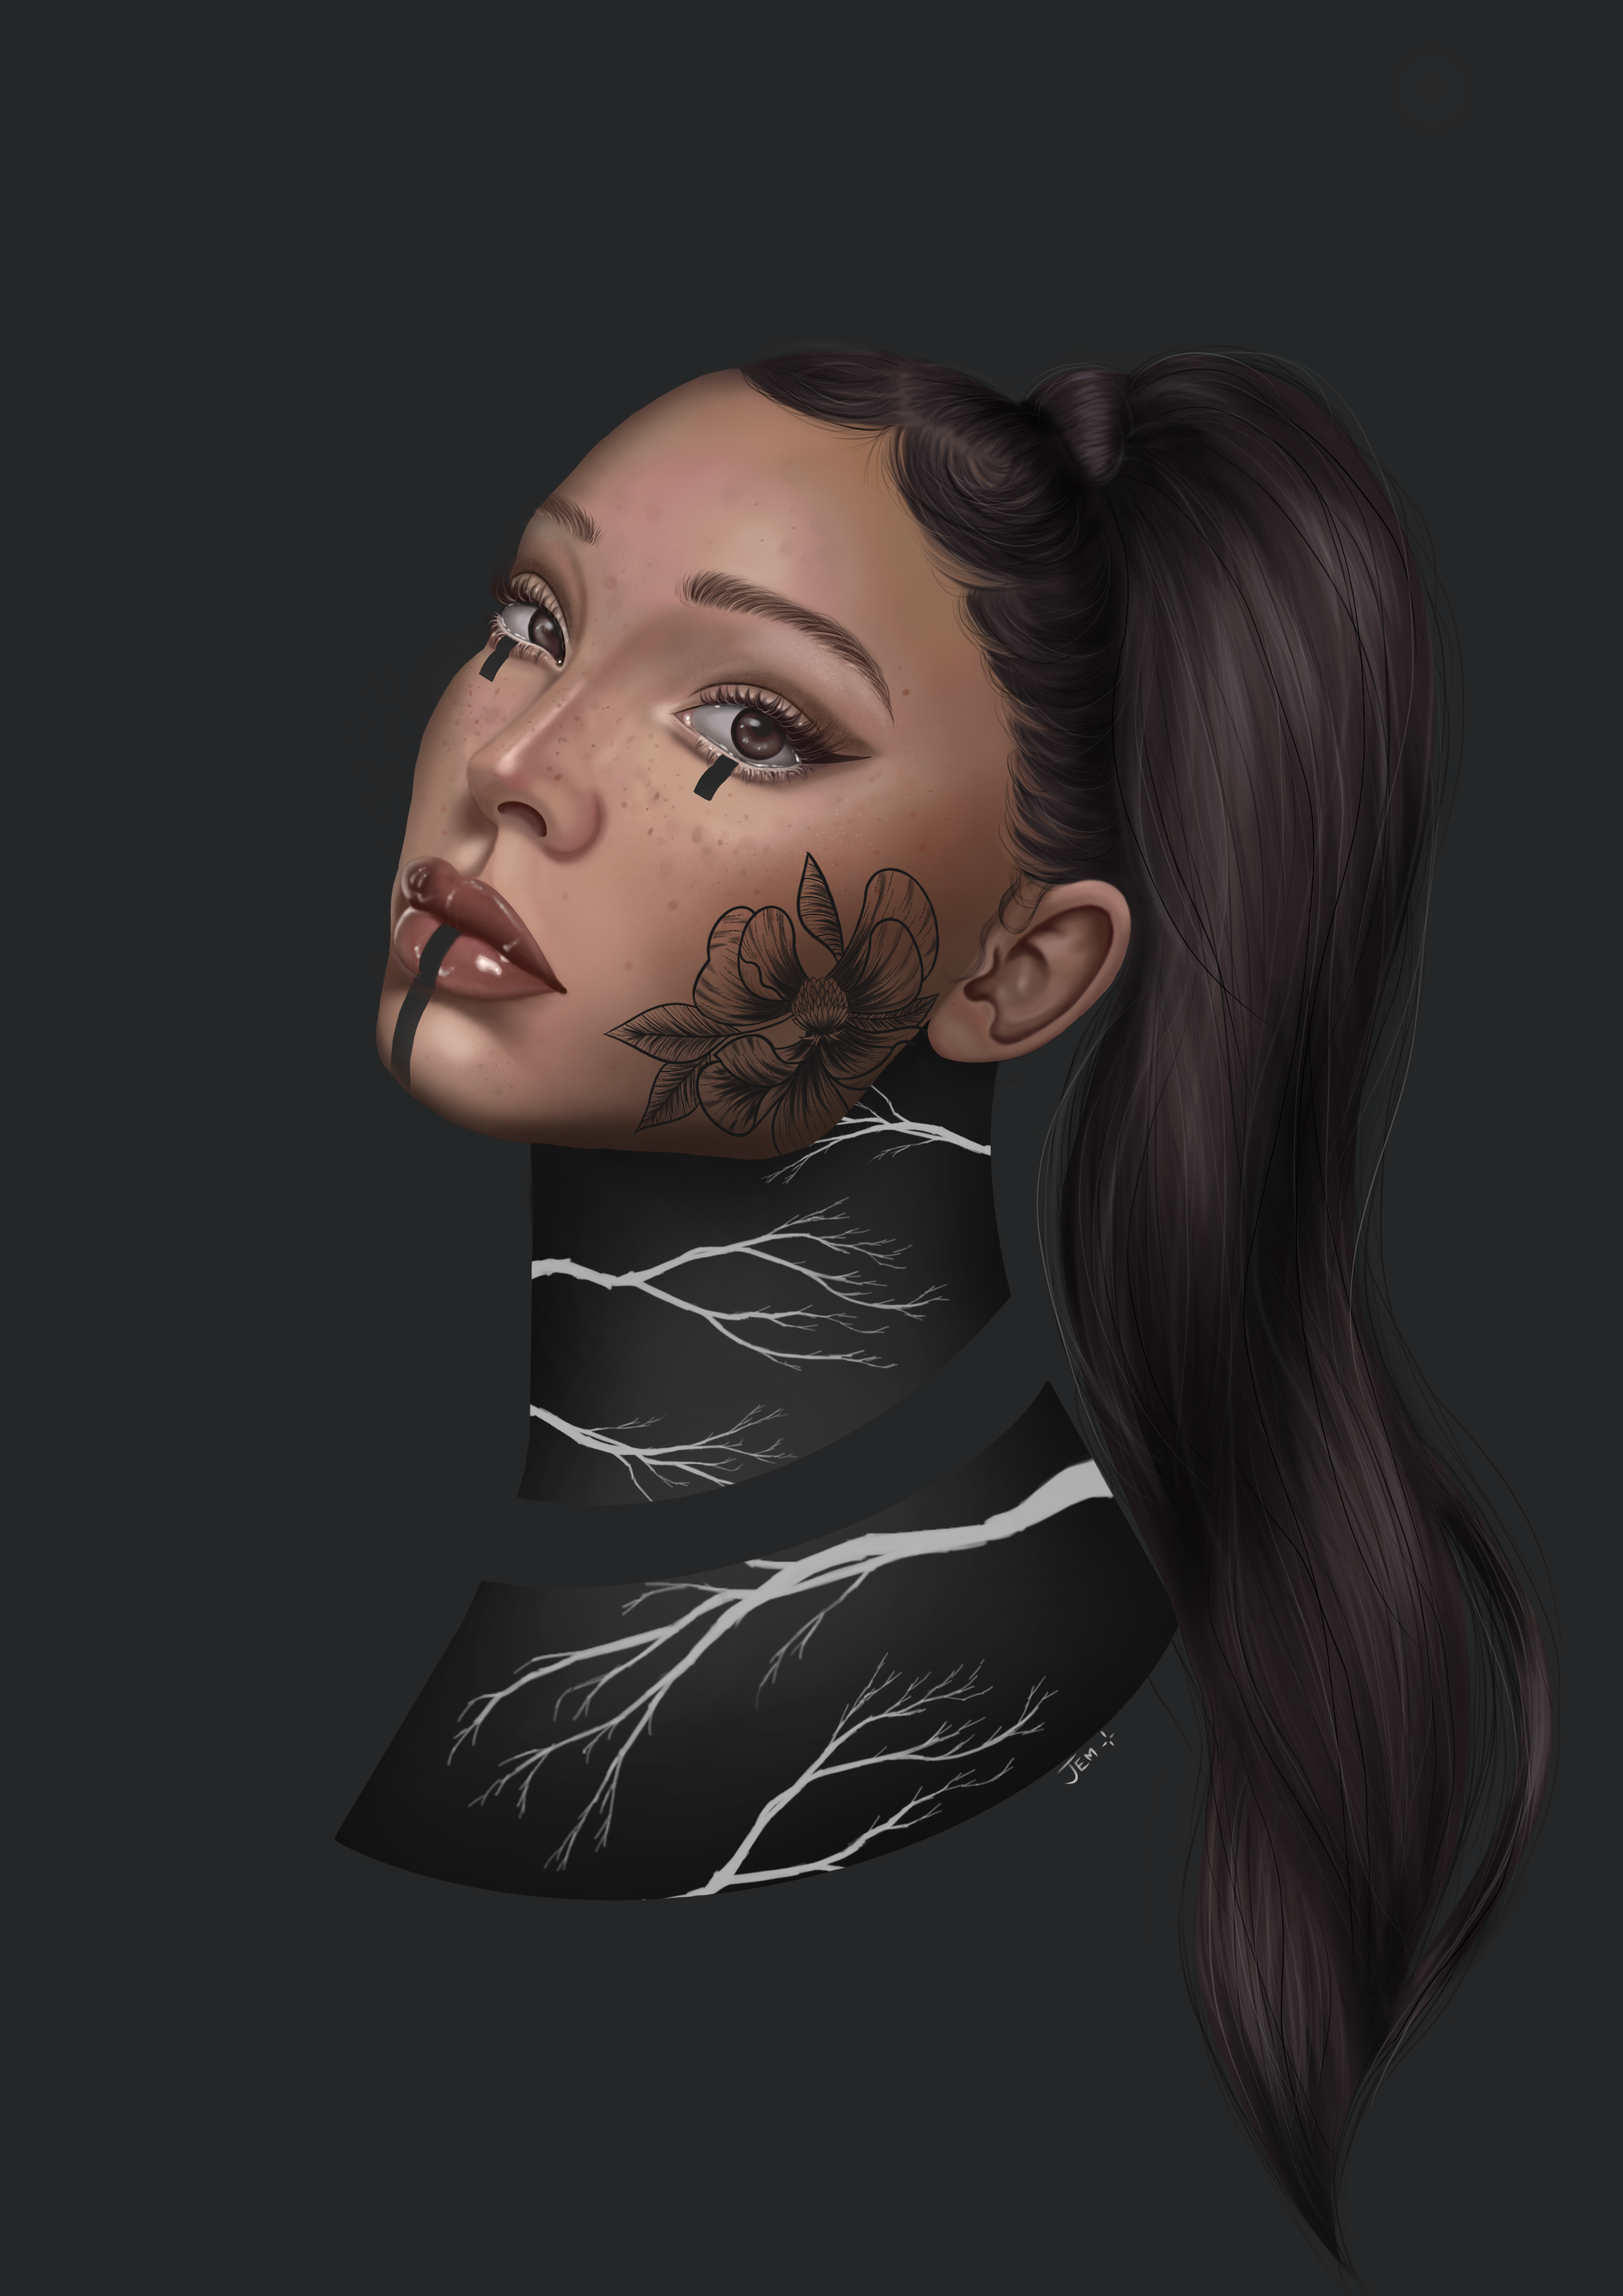 Portrait illustration of woman with face tattoo and branch detailing on the neck